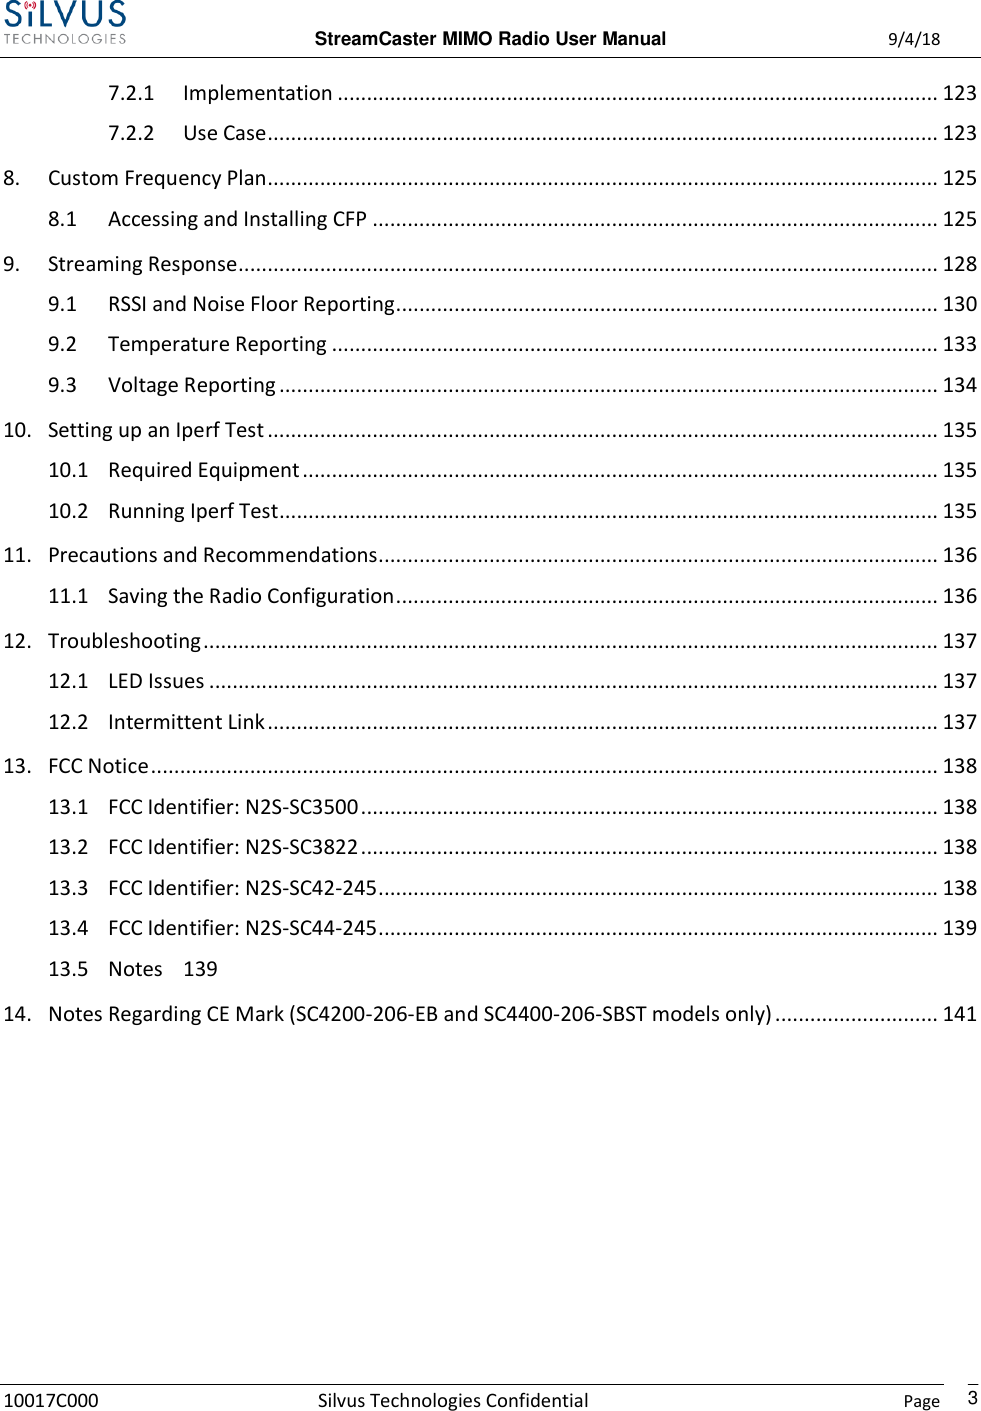  StreamCaster MIMO Radio User Manual  9/4/18 10017C000 Silvus Technologies Confidential    Page    3 7.2.1  Implementation ....................................................................................................... 123 7.2.2  Use Case ................................................................................................................... 123 8.  Custom Frequency Plan................................................................................................................... 125 8.1  Accessing and Installing CFP ................................................................................................. 125 9.  Streaming Response ........................................................................................................................ 128 9.1  RSSI and Noise Floor Reporting ............................................................................................. 130 9.2  Temperature Reporting ........................................................................................................ 133 9.3  Voltage Reporting ................................................................................................................. 134 10.  Setting up an Iperf Test ................................................................................................................... 135 10.1  Required Equipment ............................................................................................................. 135 10.2  Running Iperf Test ................................................................................................................. 135 11.  Precautions and Recommendations................................................................................................ 136 11.1  Saving the Radio Configuration ............................................................................................. 136 12.  Troubleshooting .............................................................................................................................. 137 12.1  LED Issues ............................................................................................................................. 137 12.2  Intermittent Link ................................................................................................................... 137 13.  FCC Notice ....................................................................................................................................... 138 13.1  FCC Identifier: N2S-SC3500 ................................................................................................... 138 13.2  FCC Identifier: N2S-SC3822 ................................................................................................... 138 13.3  FCC Identifier: N2S-SC42-245 ................................................................................................ 138 13.4  FCC Identifier: N2S-SC44-245 ................................................................................................ 139 13.5  Notes  139 14.  Notes Regarding CE Mark (SC4200-206-EB and SC4400-206-SBST models only) ............................ 141       